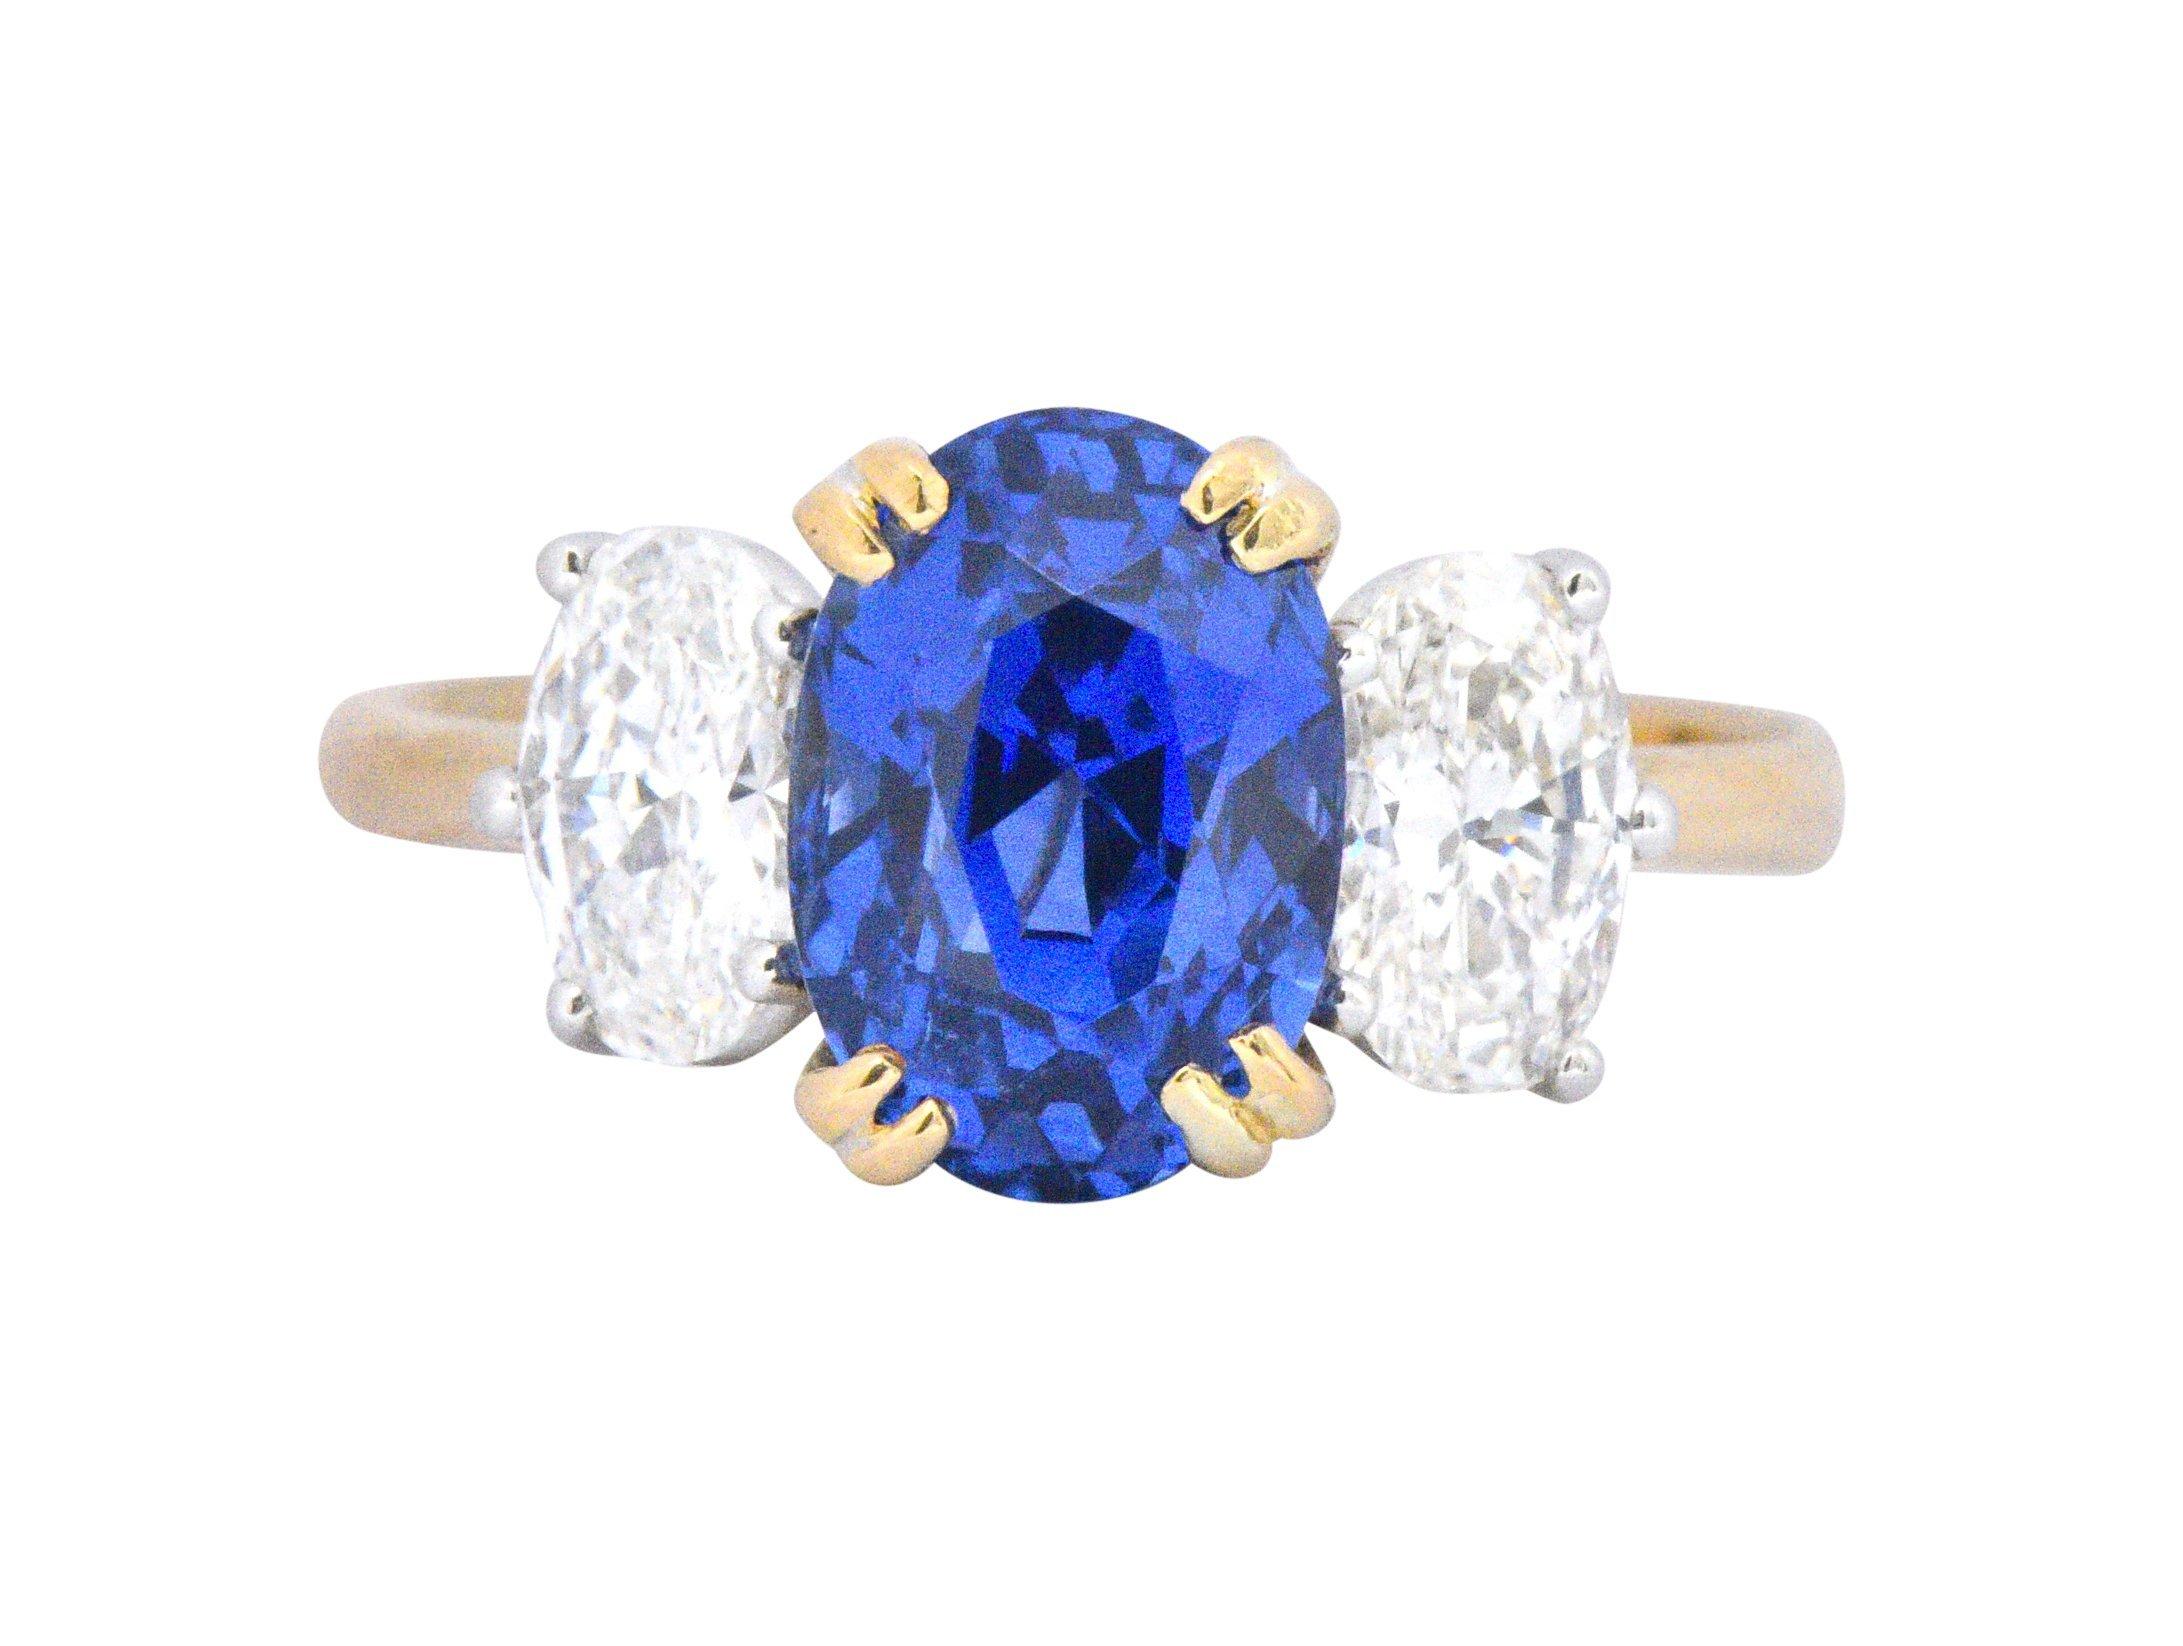 Centering a stunningly royal blue oval cut Madagascar sapphire, with no evidence of heat, weighing 3.22 carats

Flanked by two oval cut diamonds weighing approximately 1.00 carat total, G color with VS clarity

Classic three stone ring with trellis